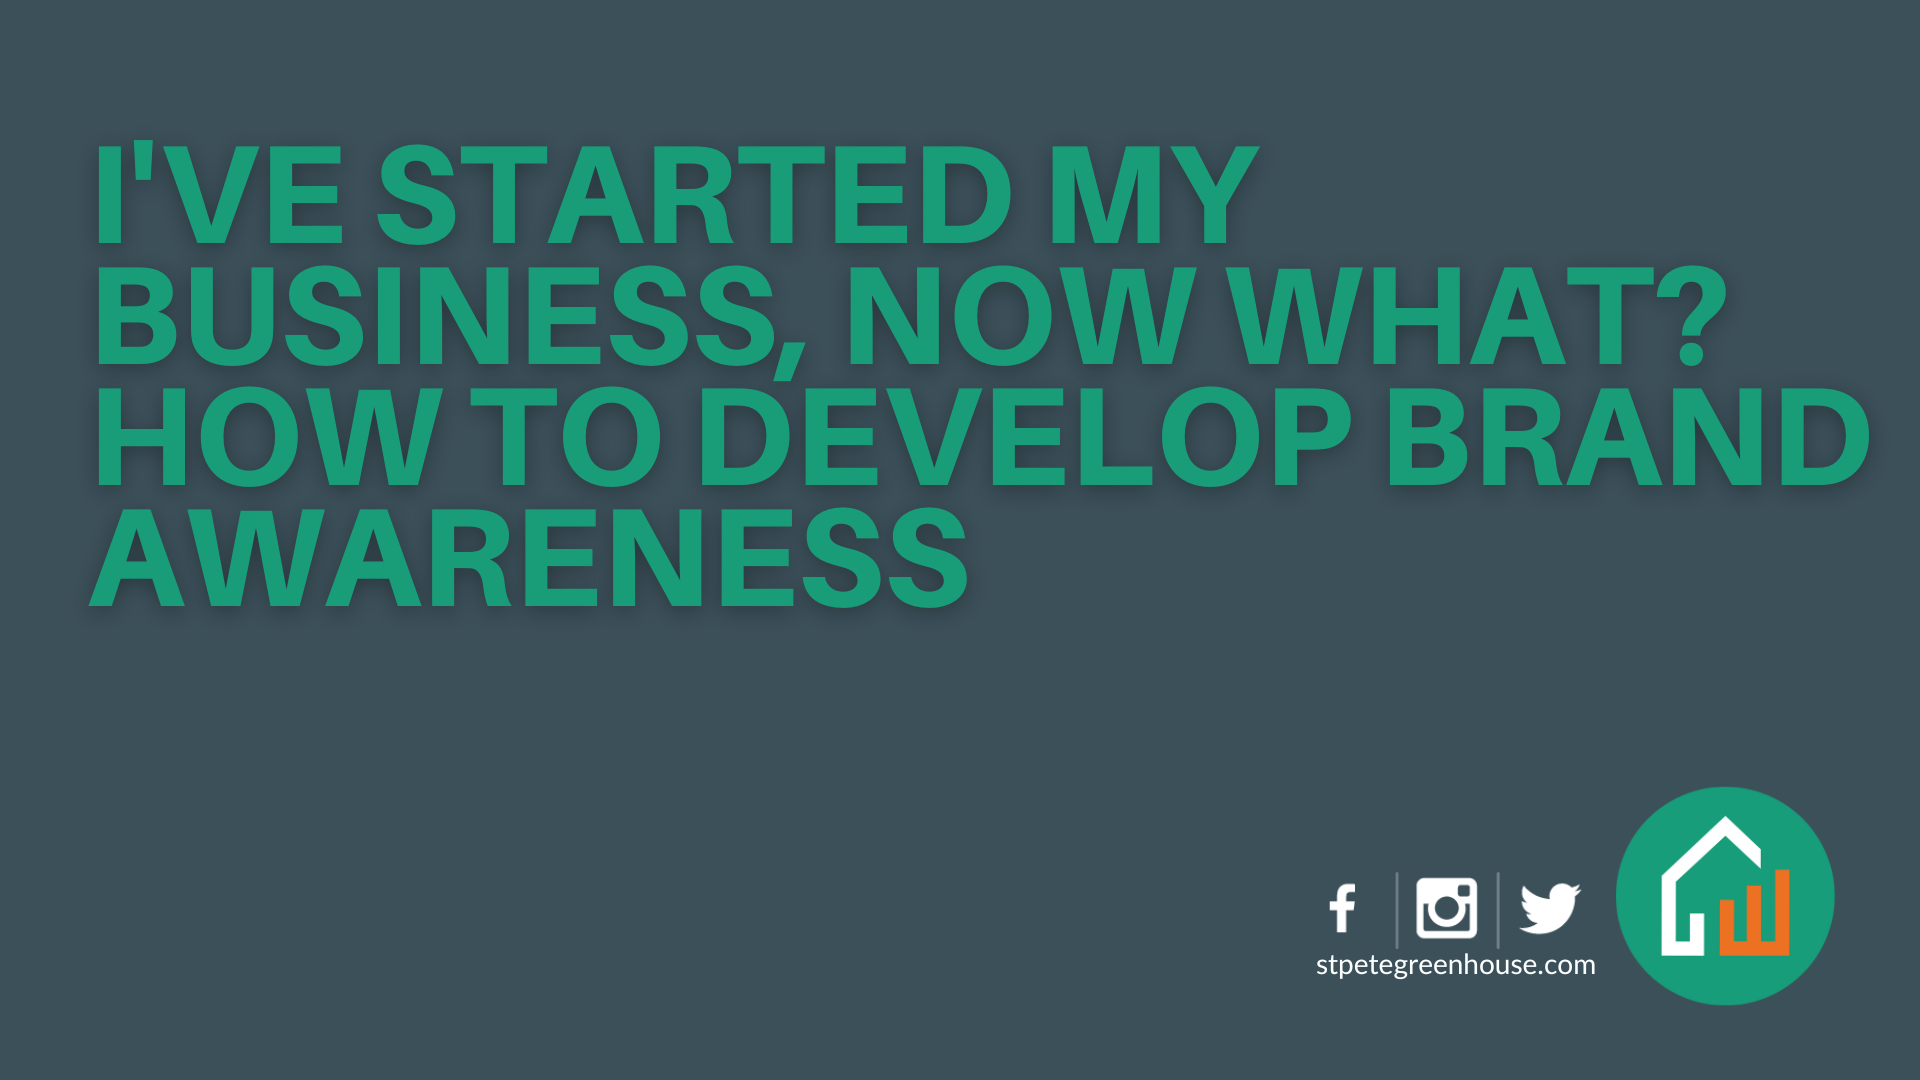 I've Started My Business, Now What? How to Develop Brand Awareness-image